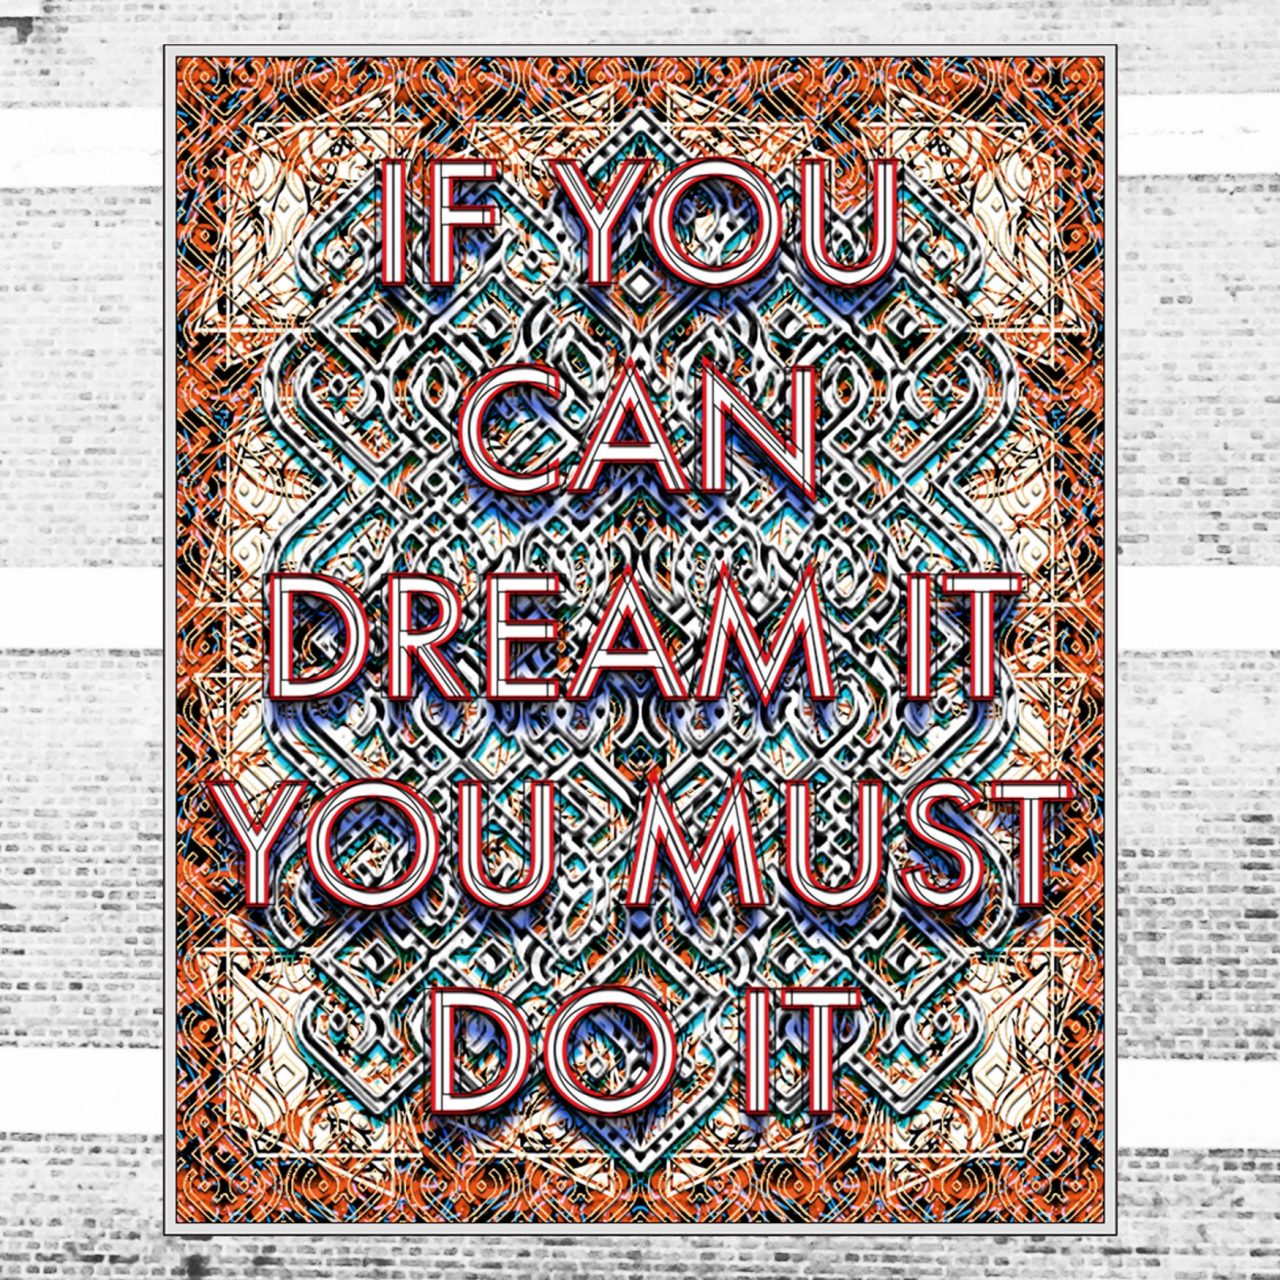 Rendering of Mark Titchner's 'If You Can Dream It, You Must Do It' due to launch on the gable end wall of The Hat Factory in December 2016.